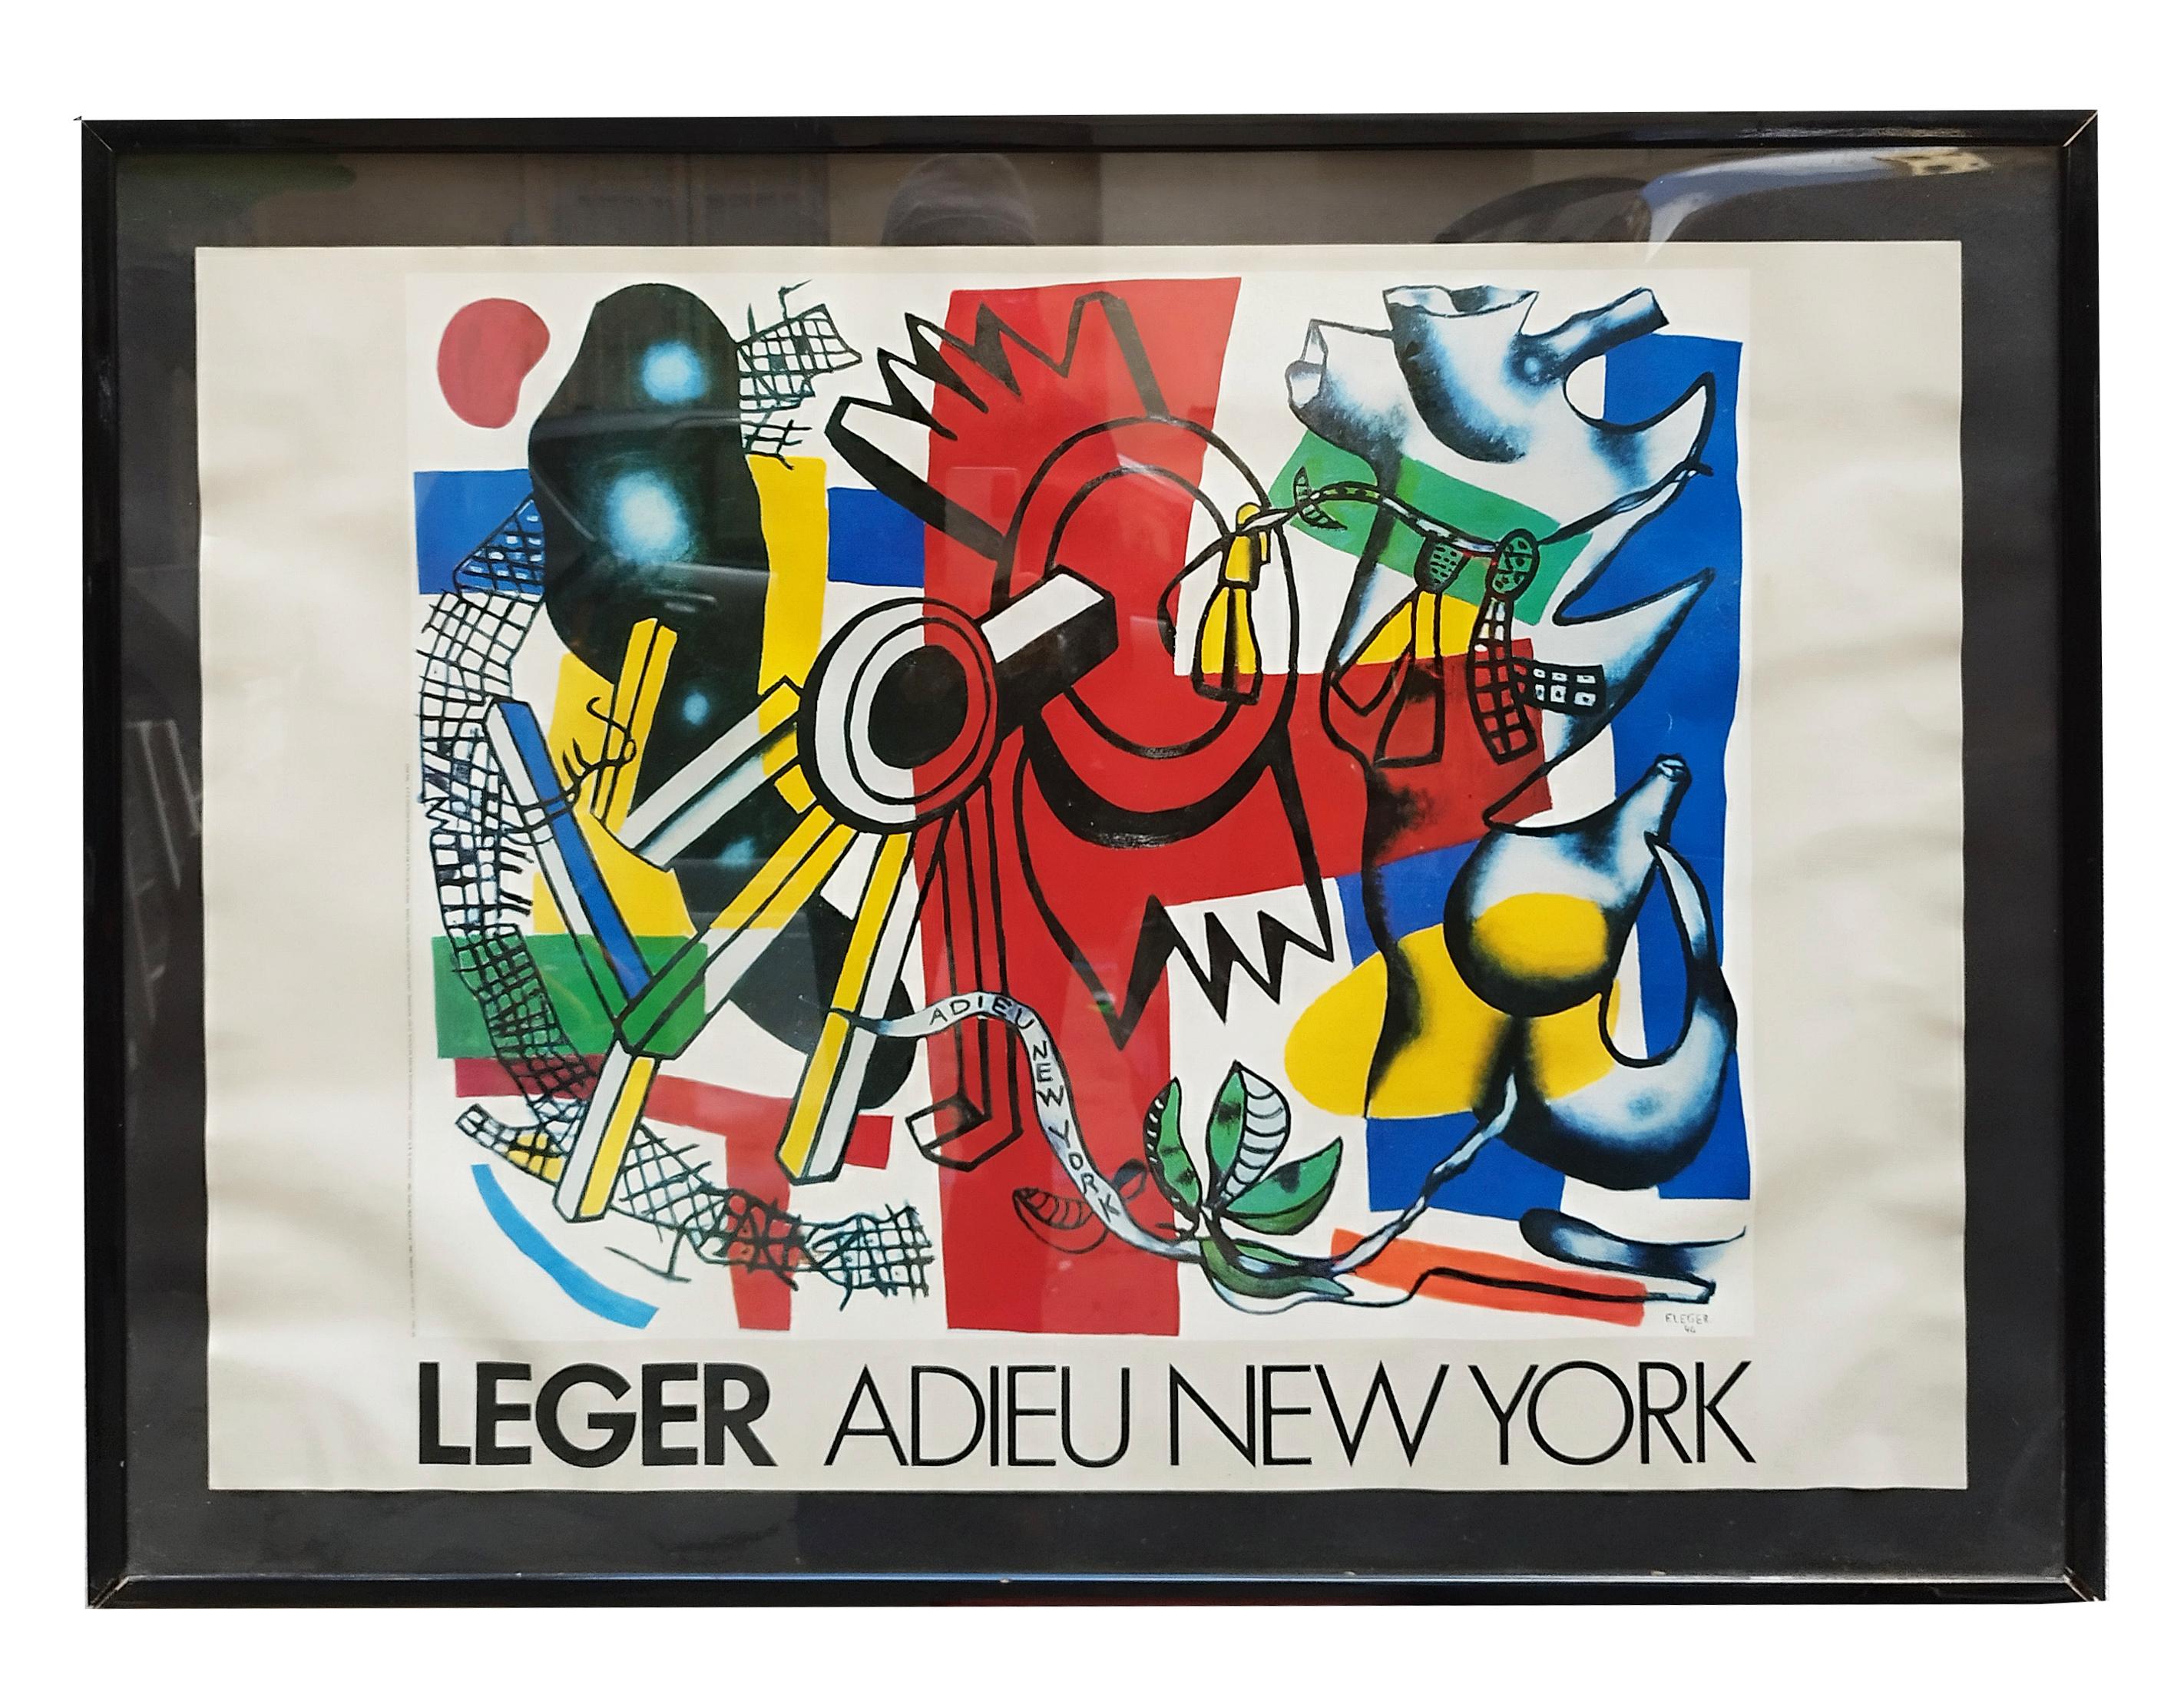 Unknown Figurative Print - ADIEU NEW YORK - Fernand Leger Lithographic Poster